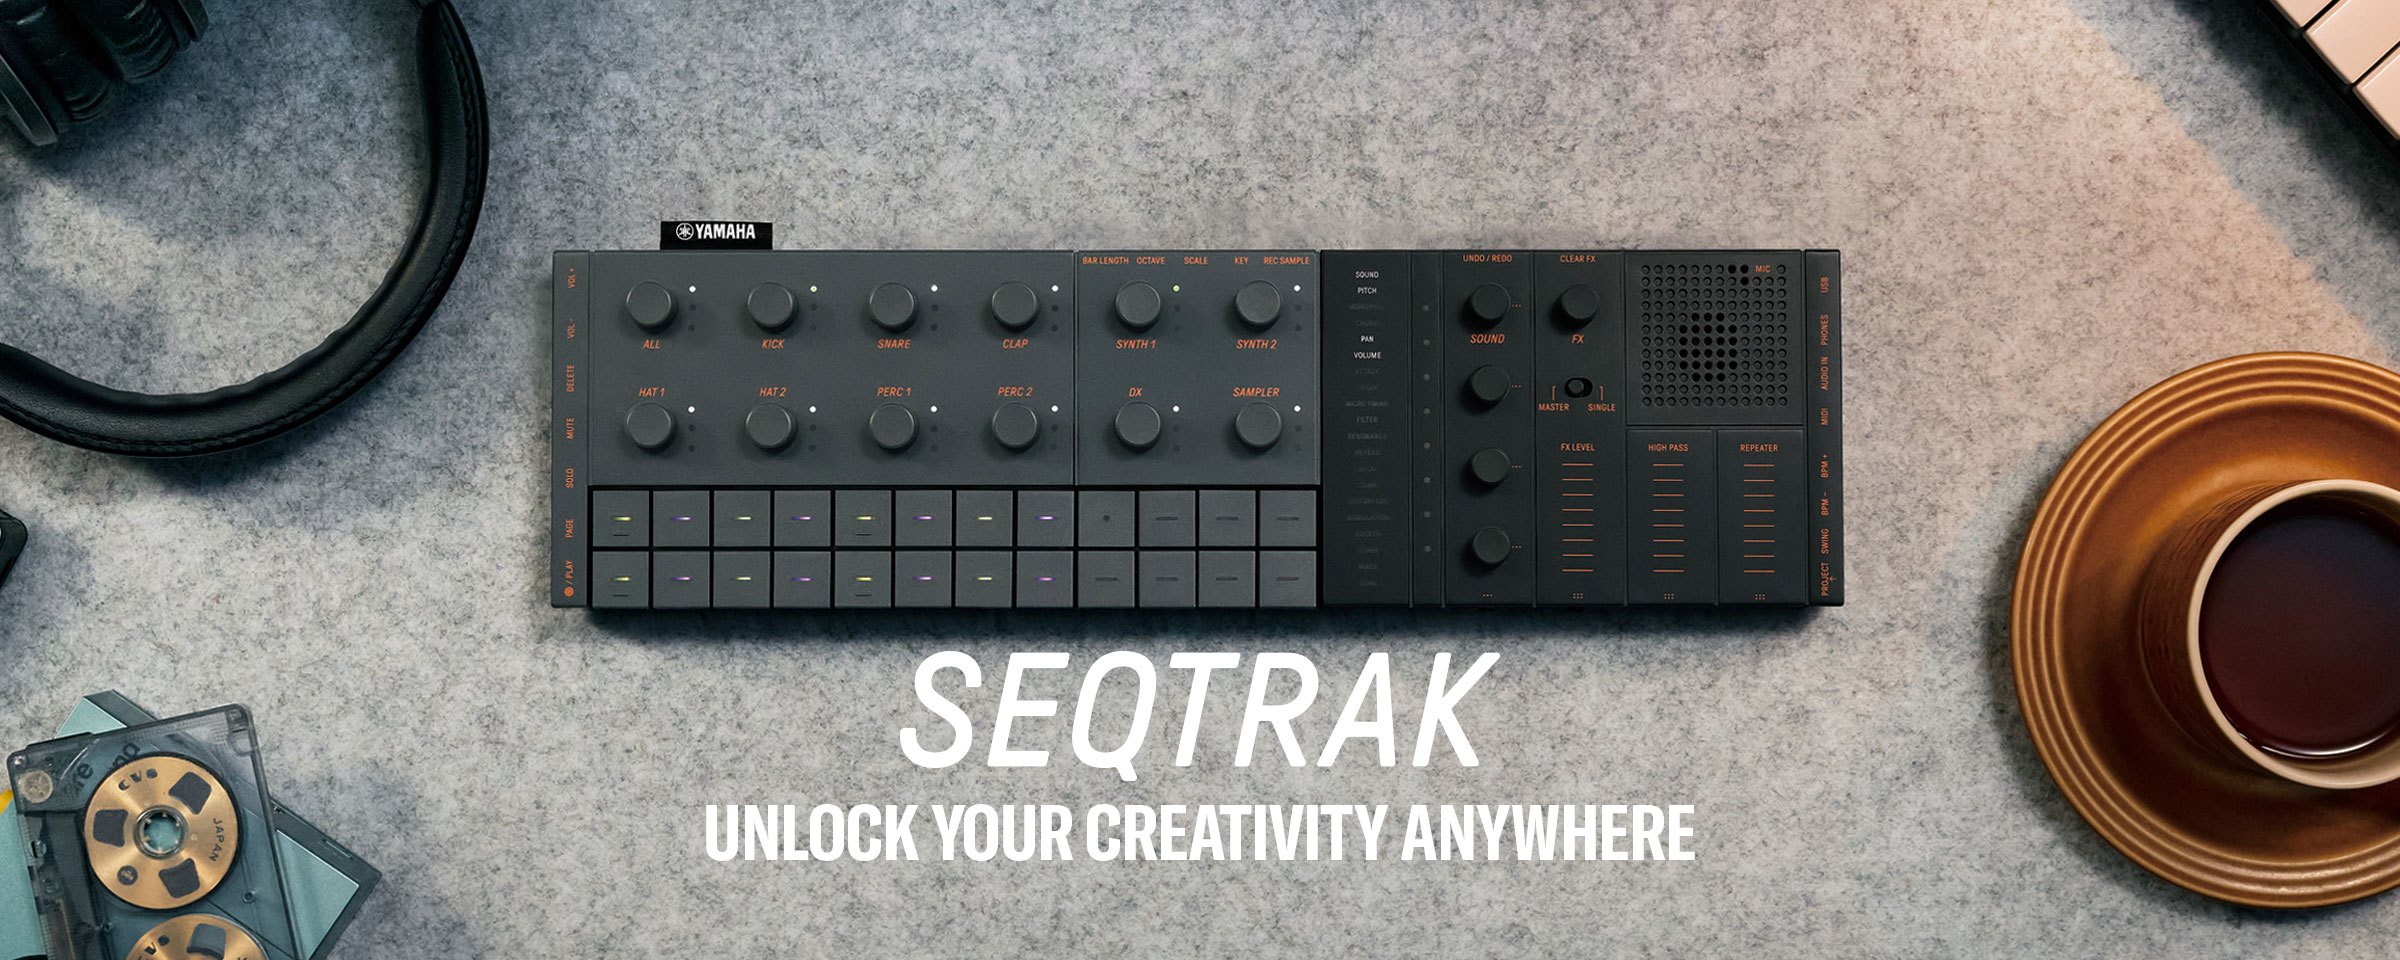 SEQTRAK - Overview - Music Production Studios - Synthesizers 